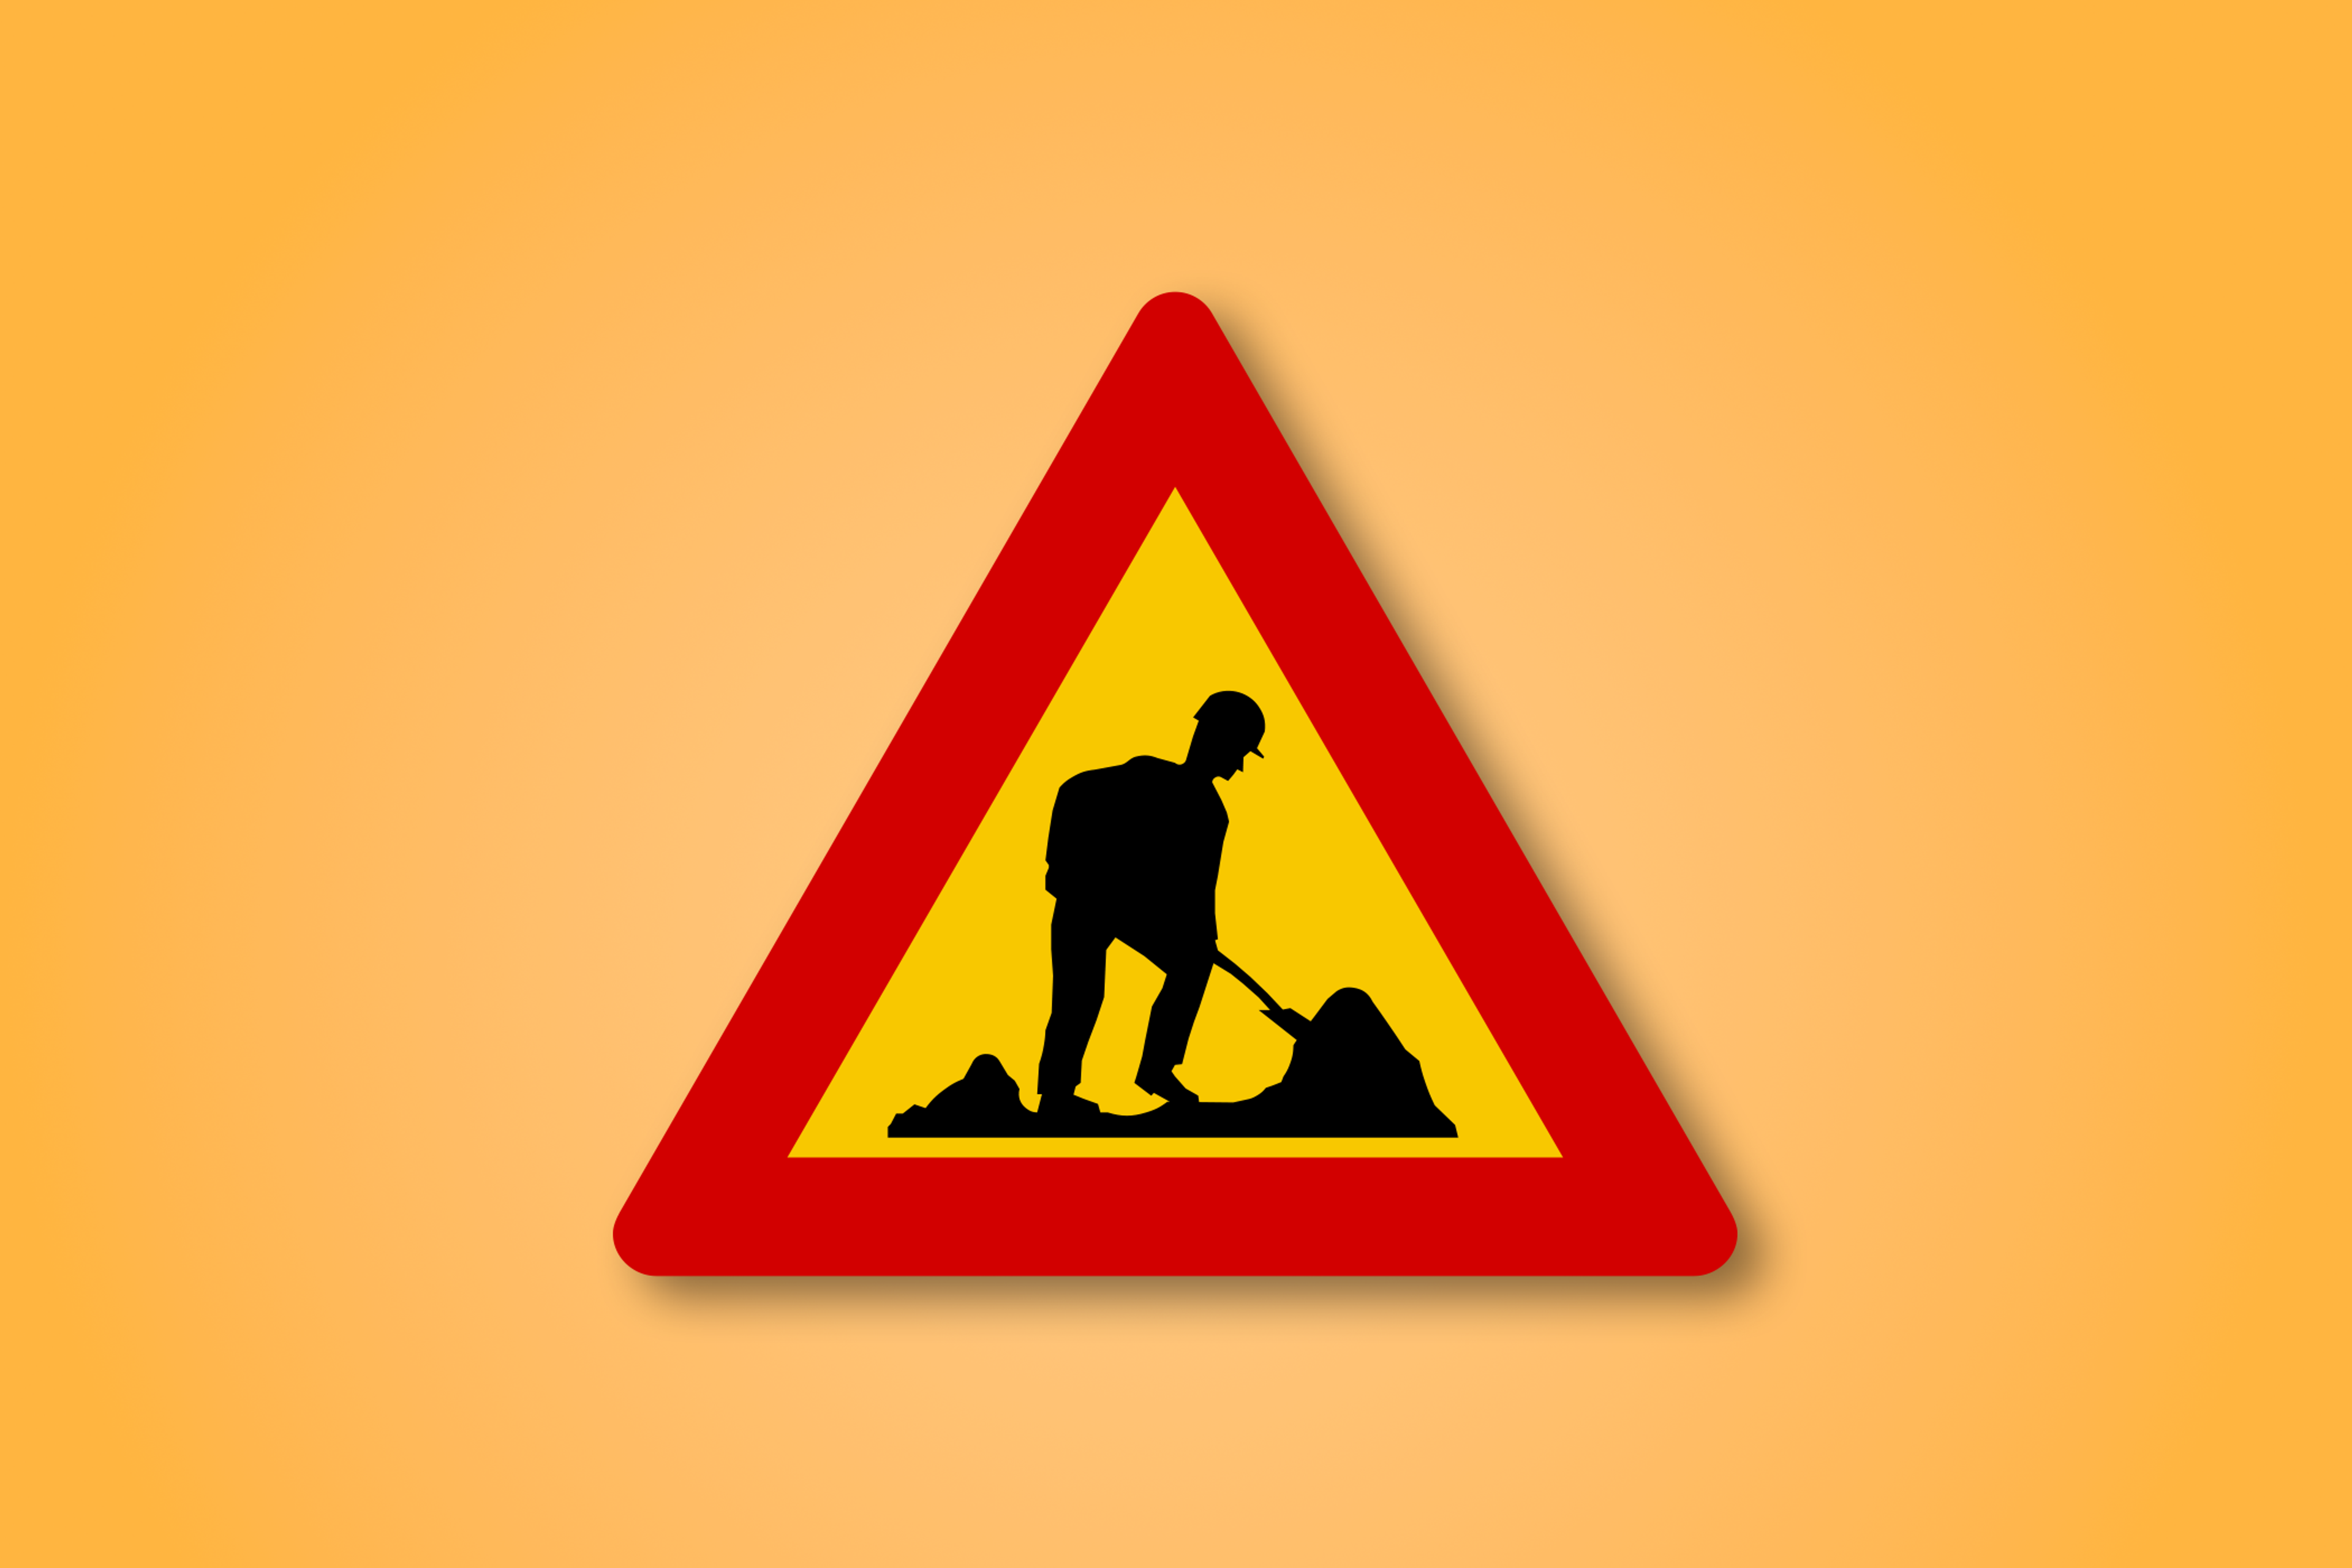 Red and yellow triangle road sign with an Icelandic Worker in the middle. This road sign means Workers ahead